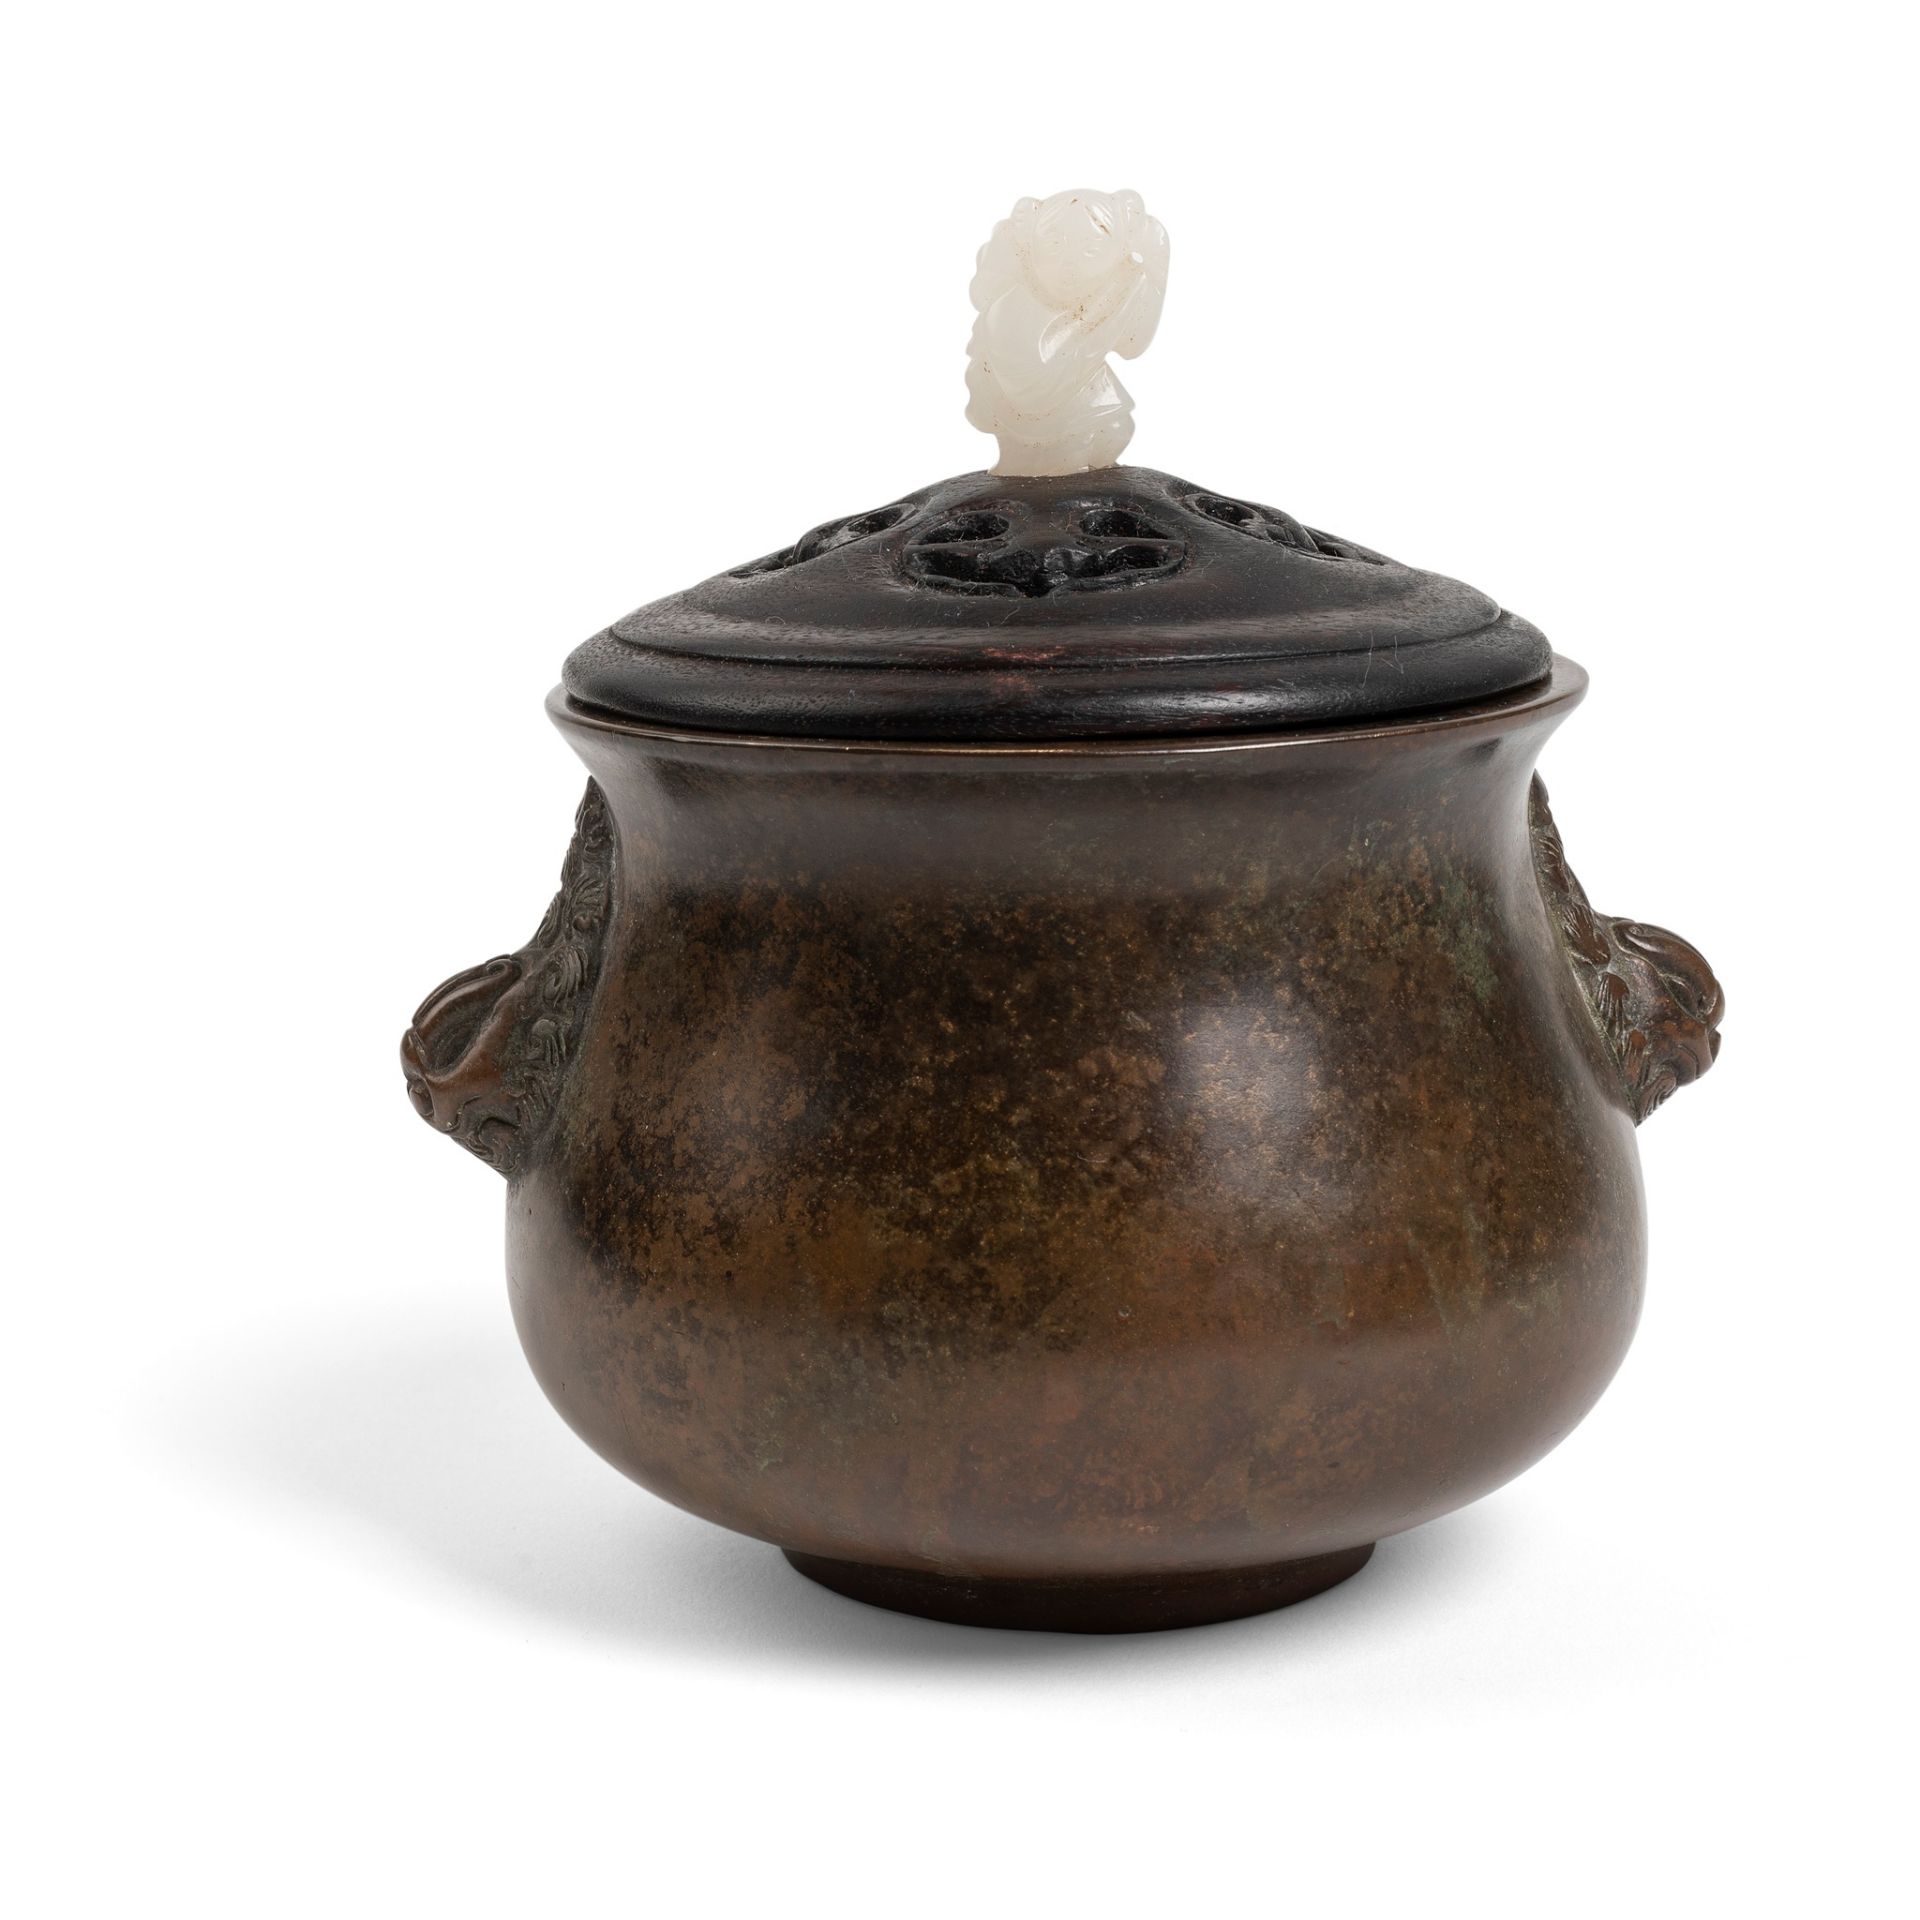 BRONZE CENSER WITH WOODEN COVER XUANDE MARK